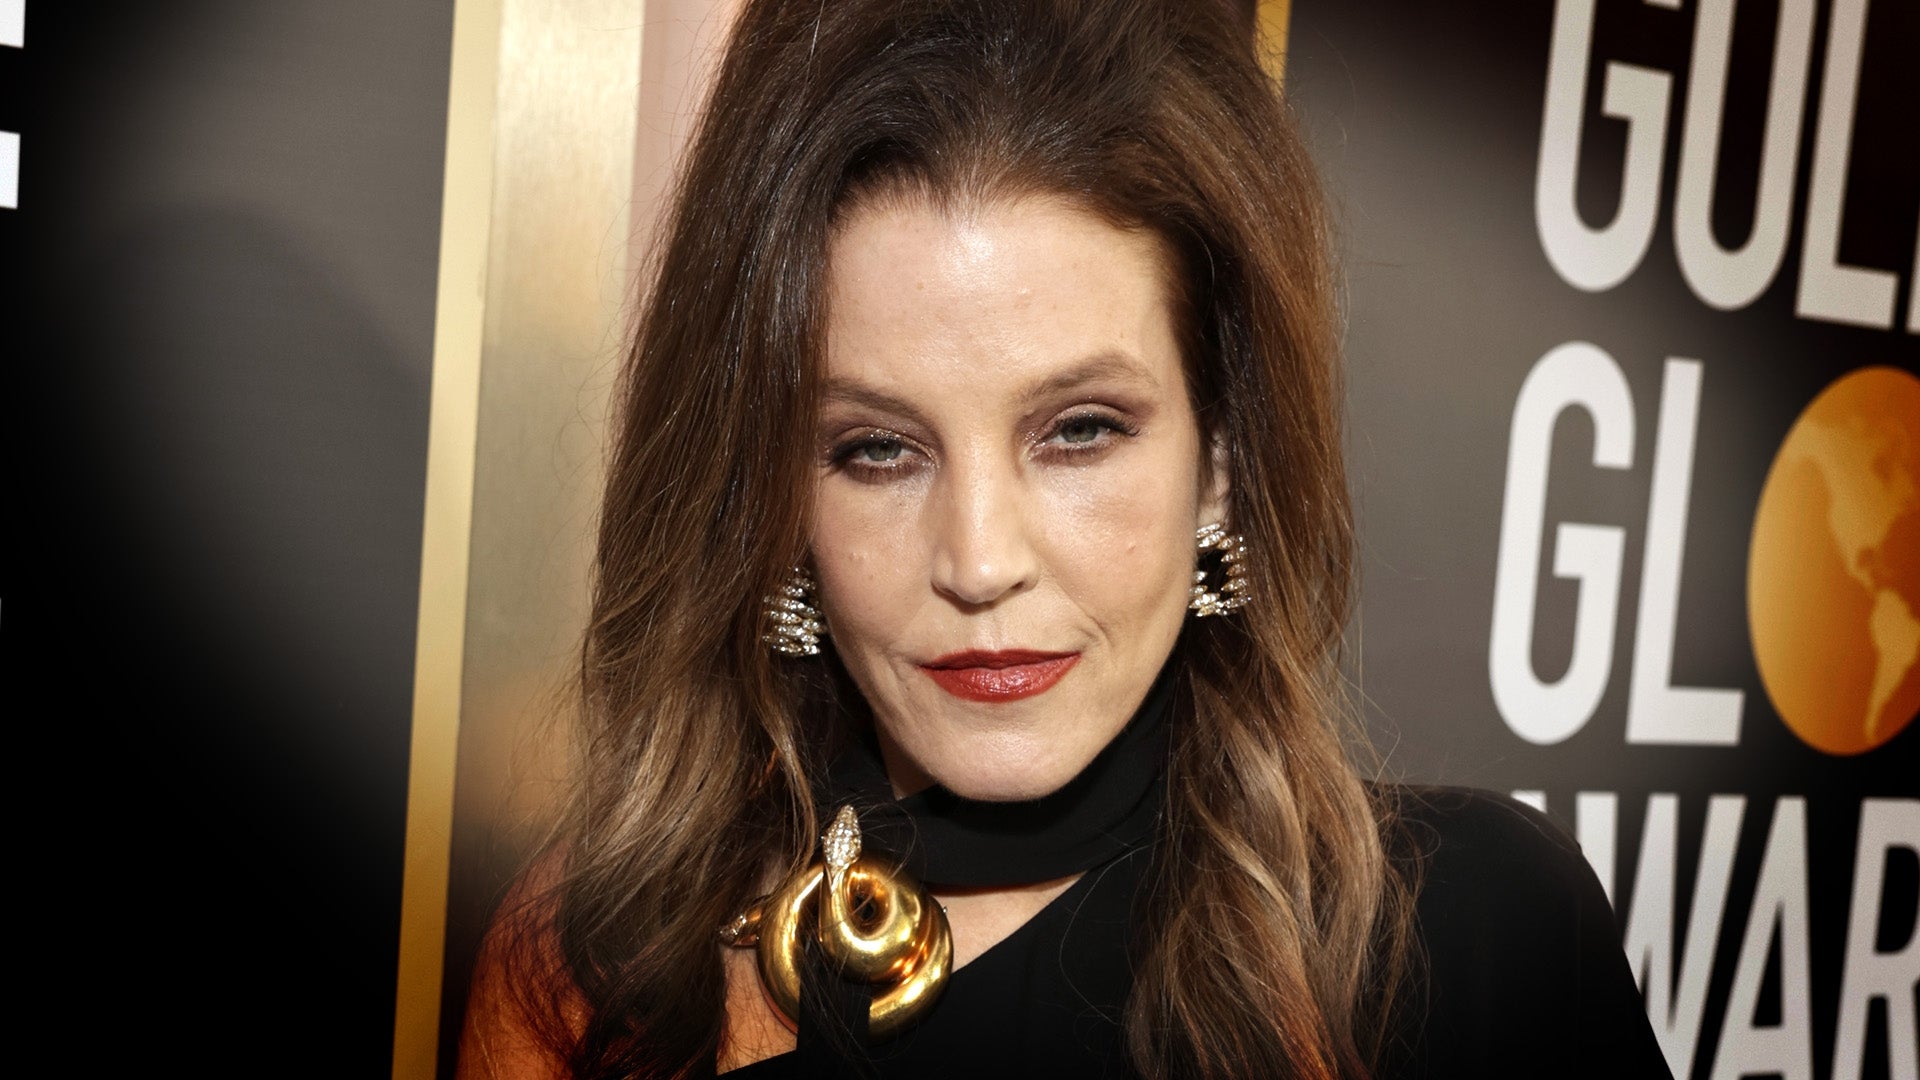 Lisa Marie Presley: Listen to 911 Call Made Hours Before Her Death